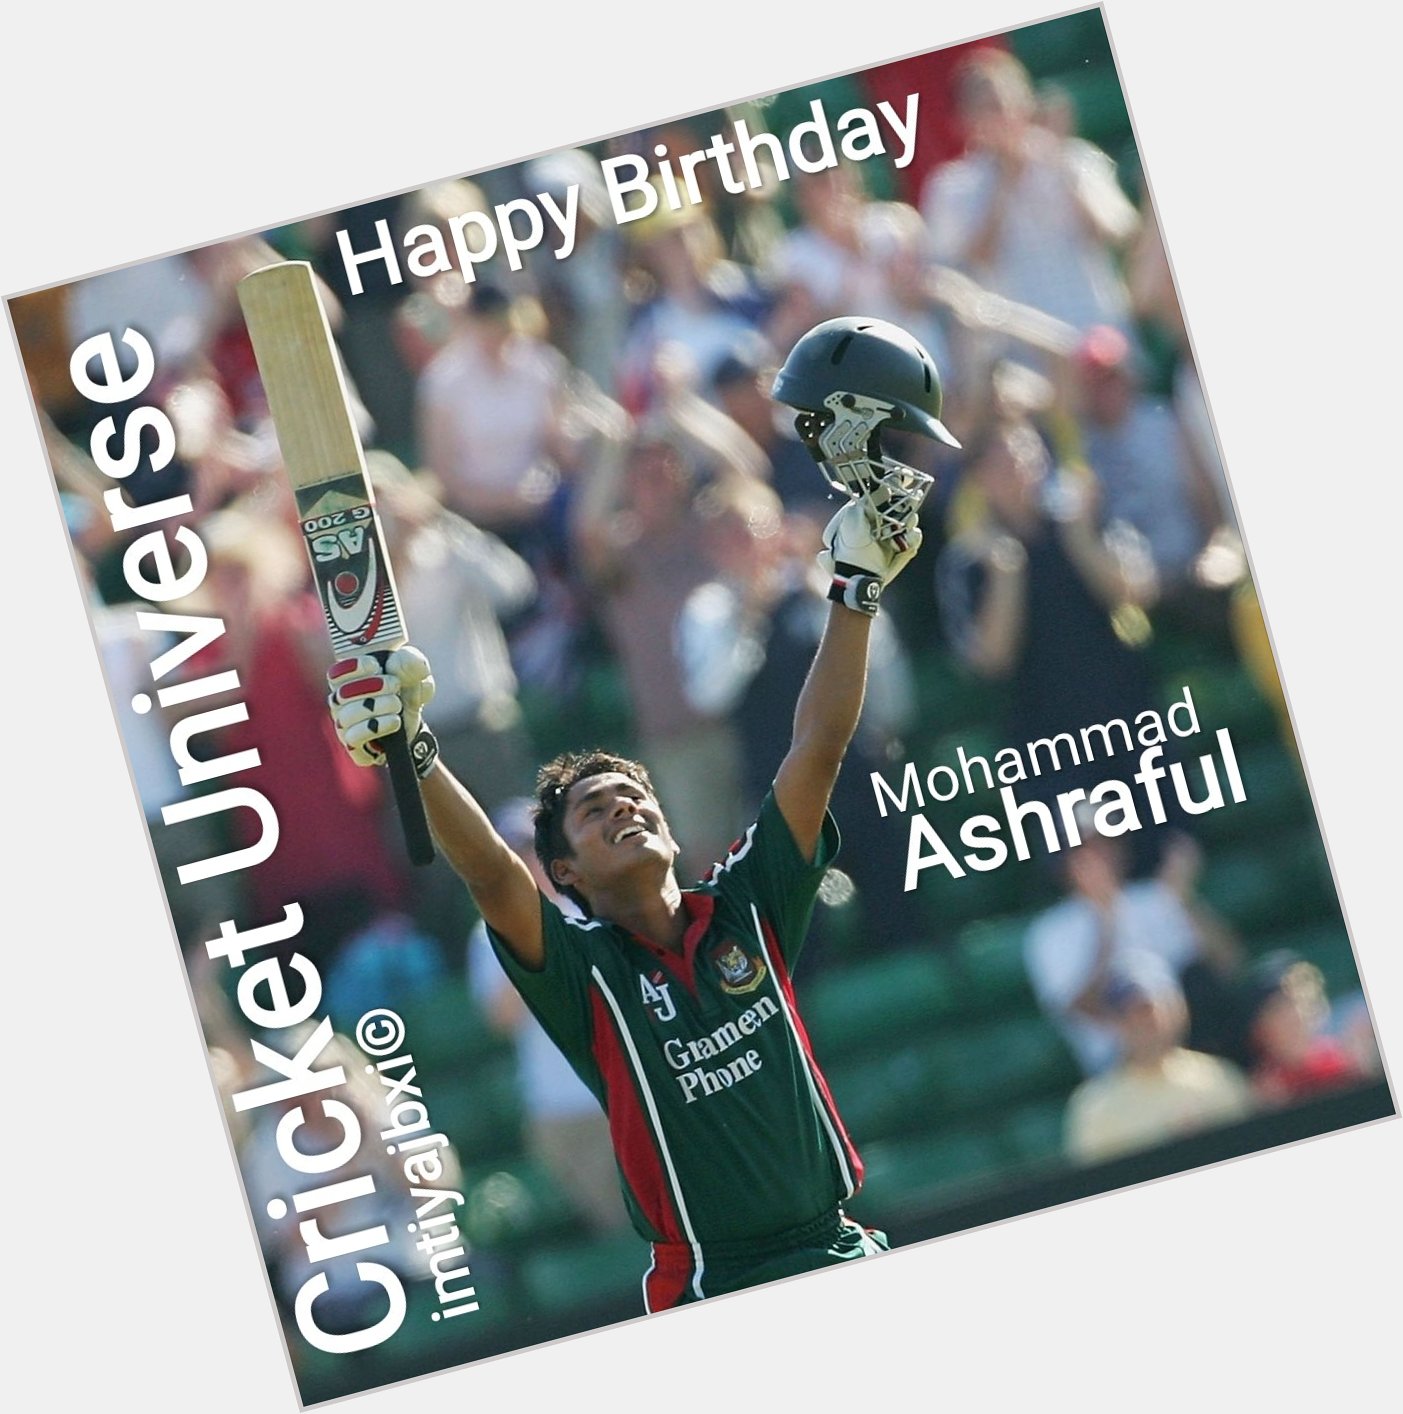 The youngest centurion in Test cricket.

Happy Birthday  Mohammad Ashraful. 